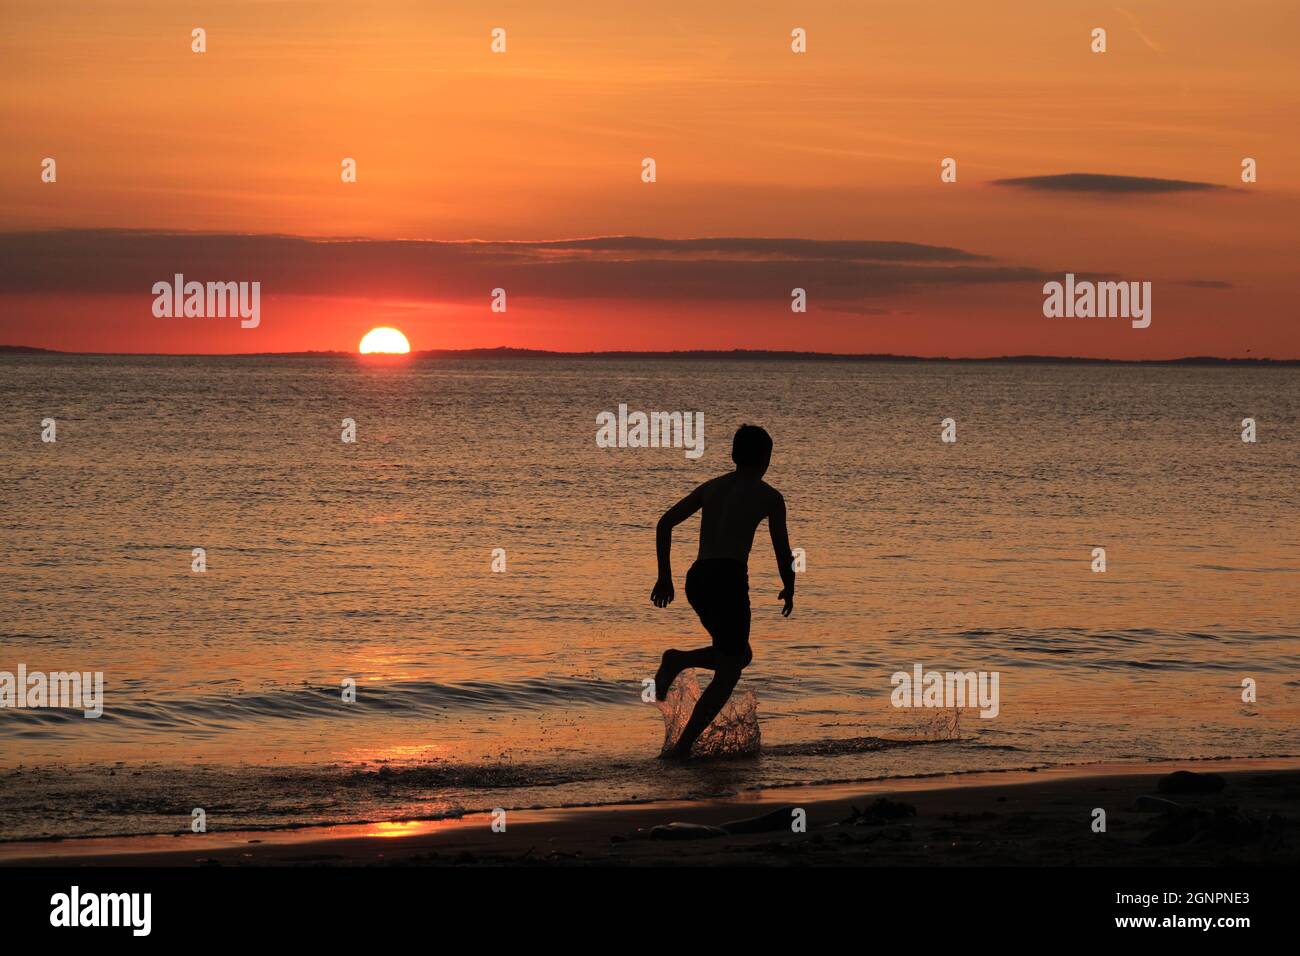 Gower, Swansea, UK. 24th August 2021.  UK weather:  A boy enjoys skim boarding the shallows under a setting sun on a dry, fine  and sunny evening at Llangennith beach on the Gower peninsula. The outlook for the next few days is for similarly fine weather with some warm spells.Credit: Gareth Llewelyn/Alamy Stock Photo